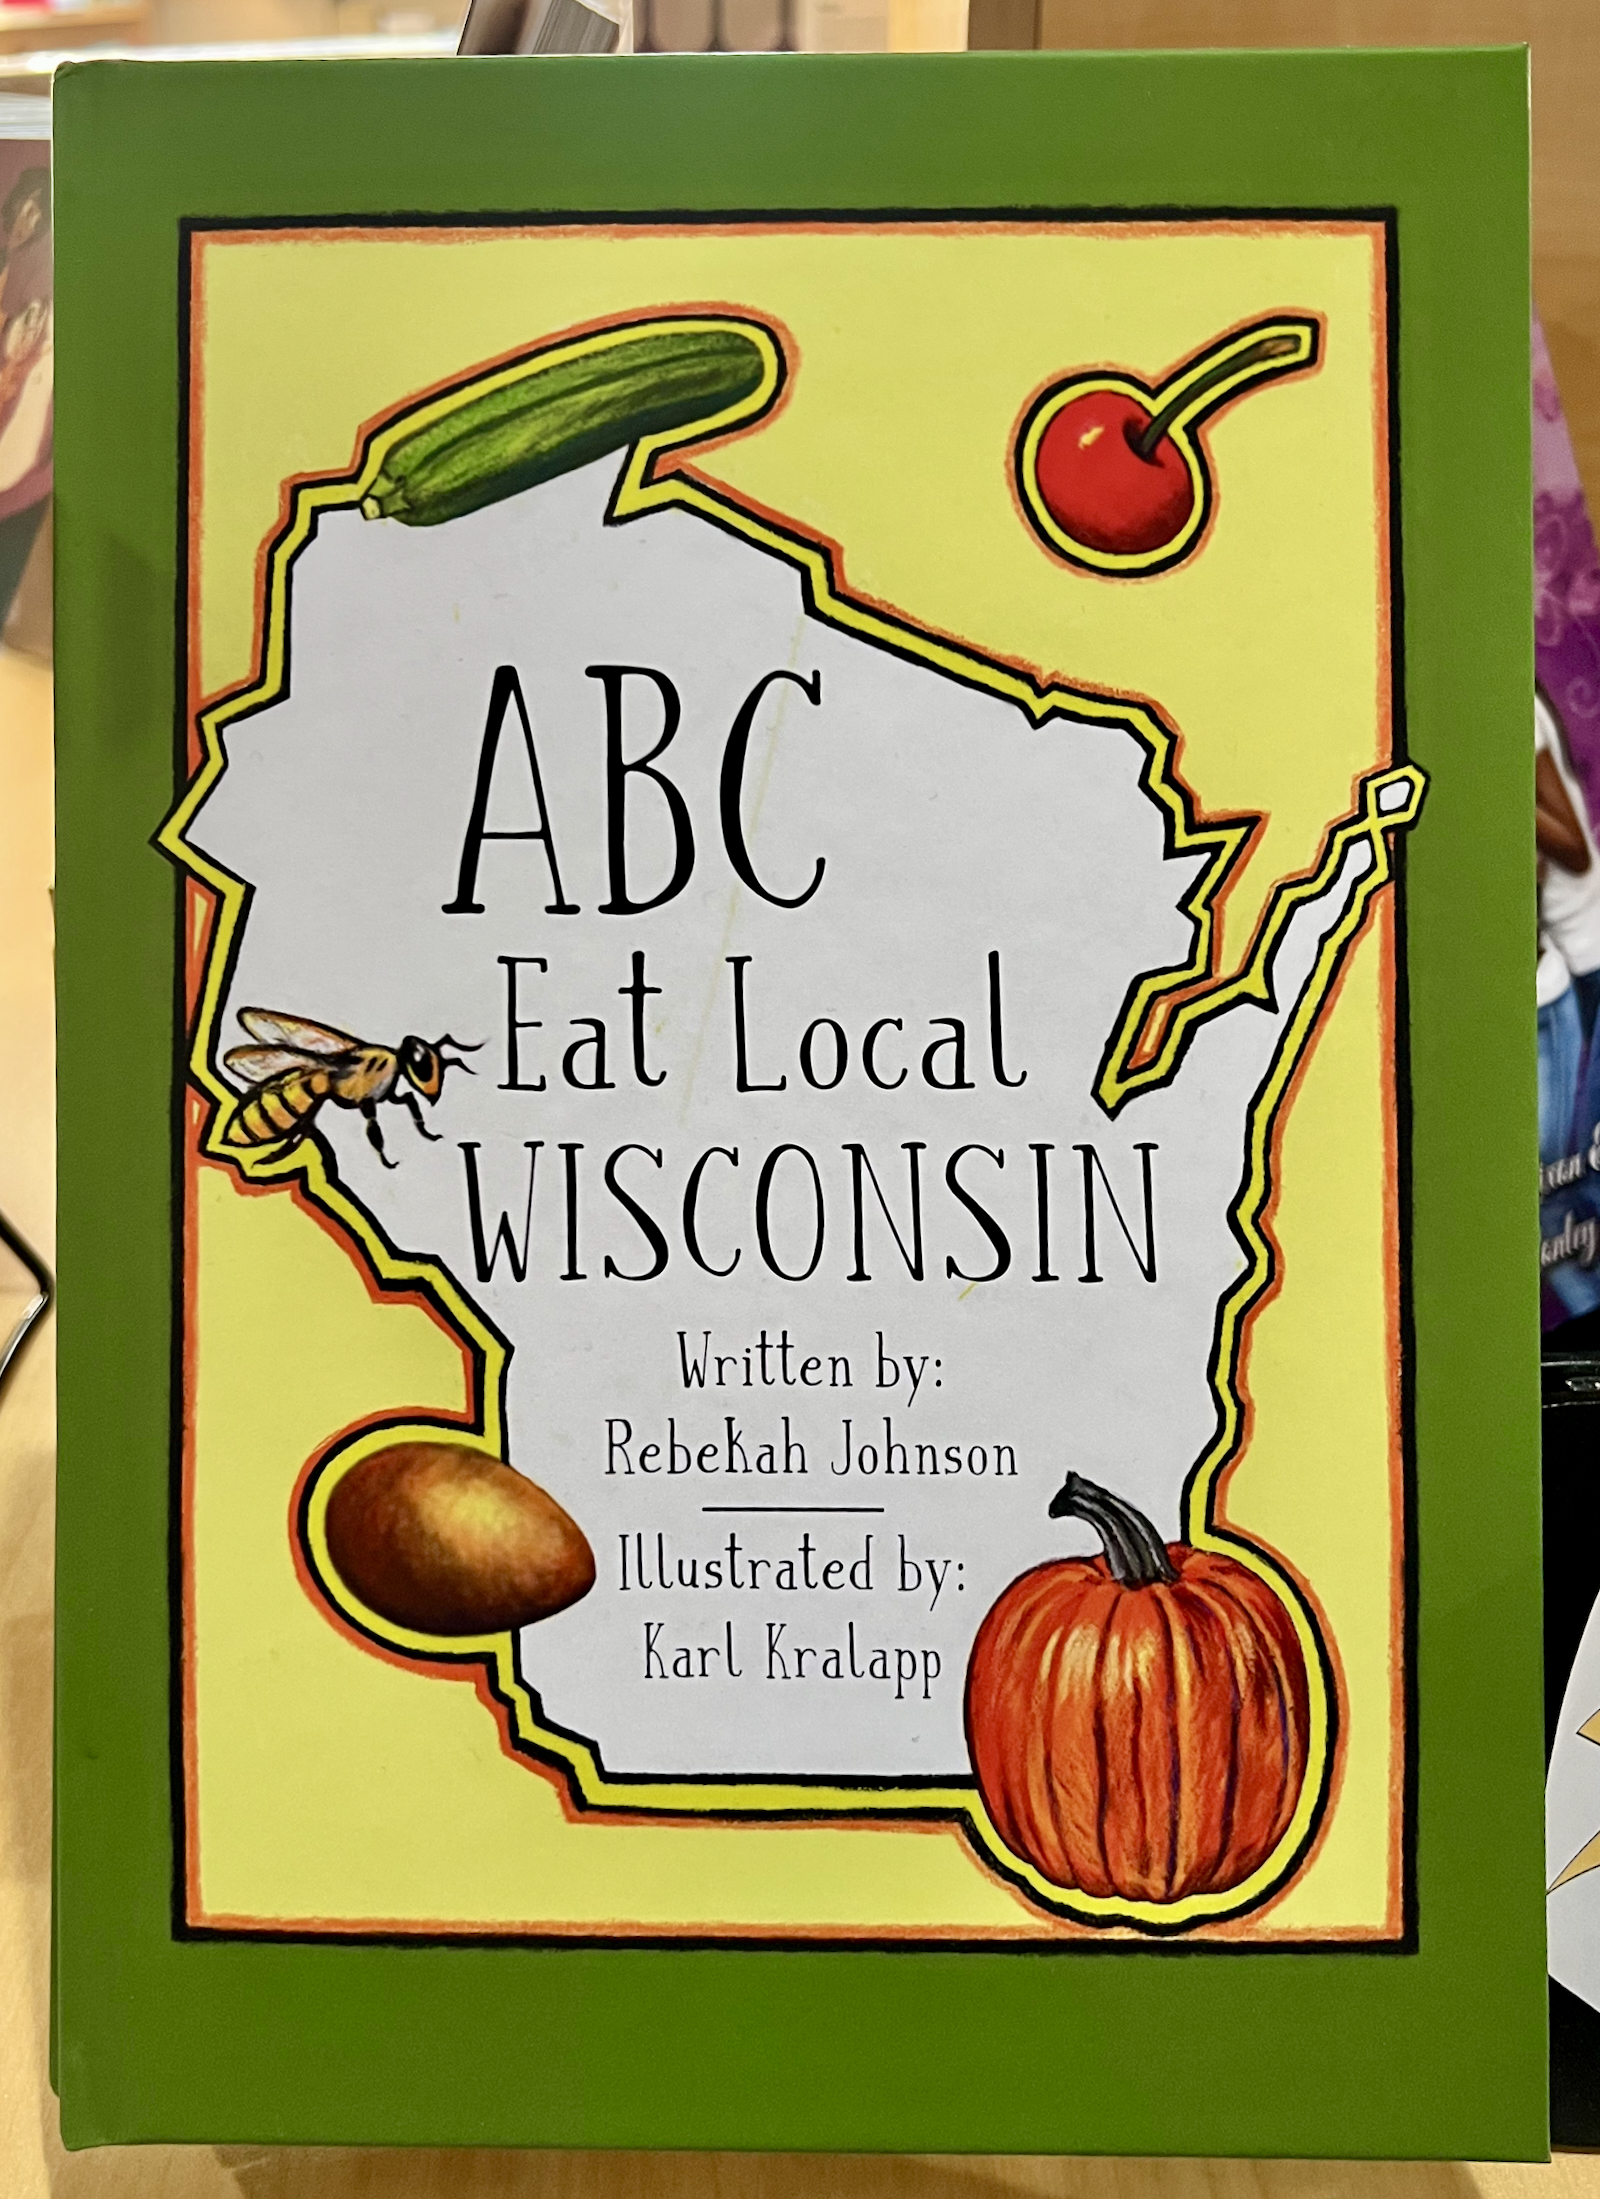 ABC Eat Local Wisconsin book